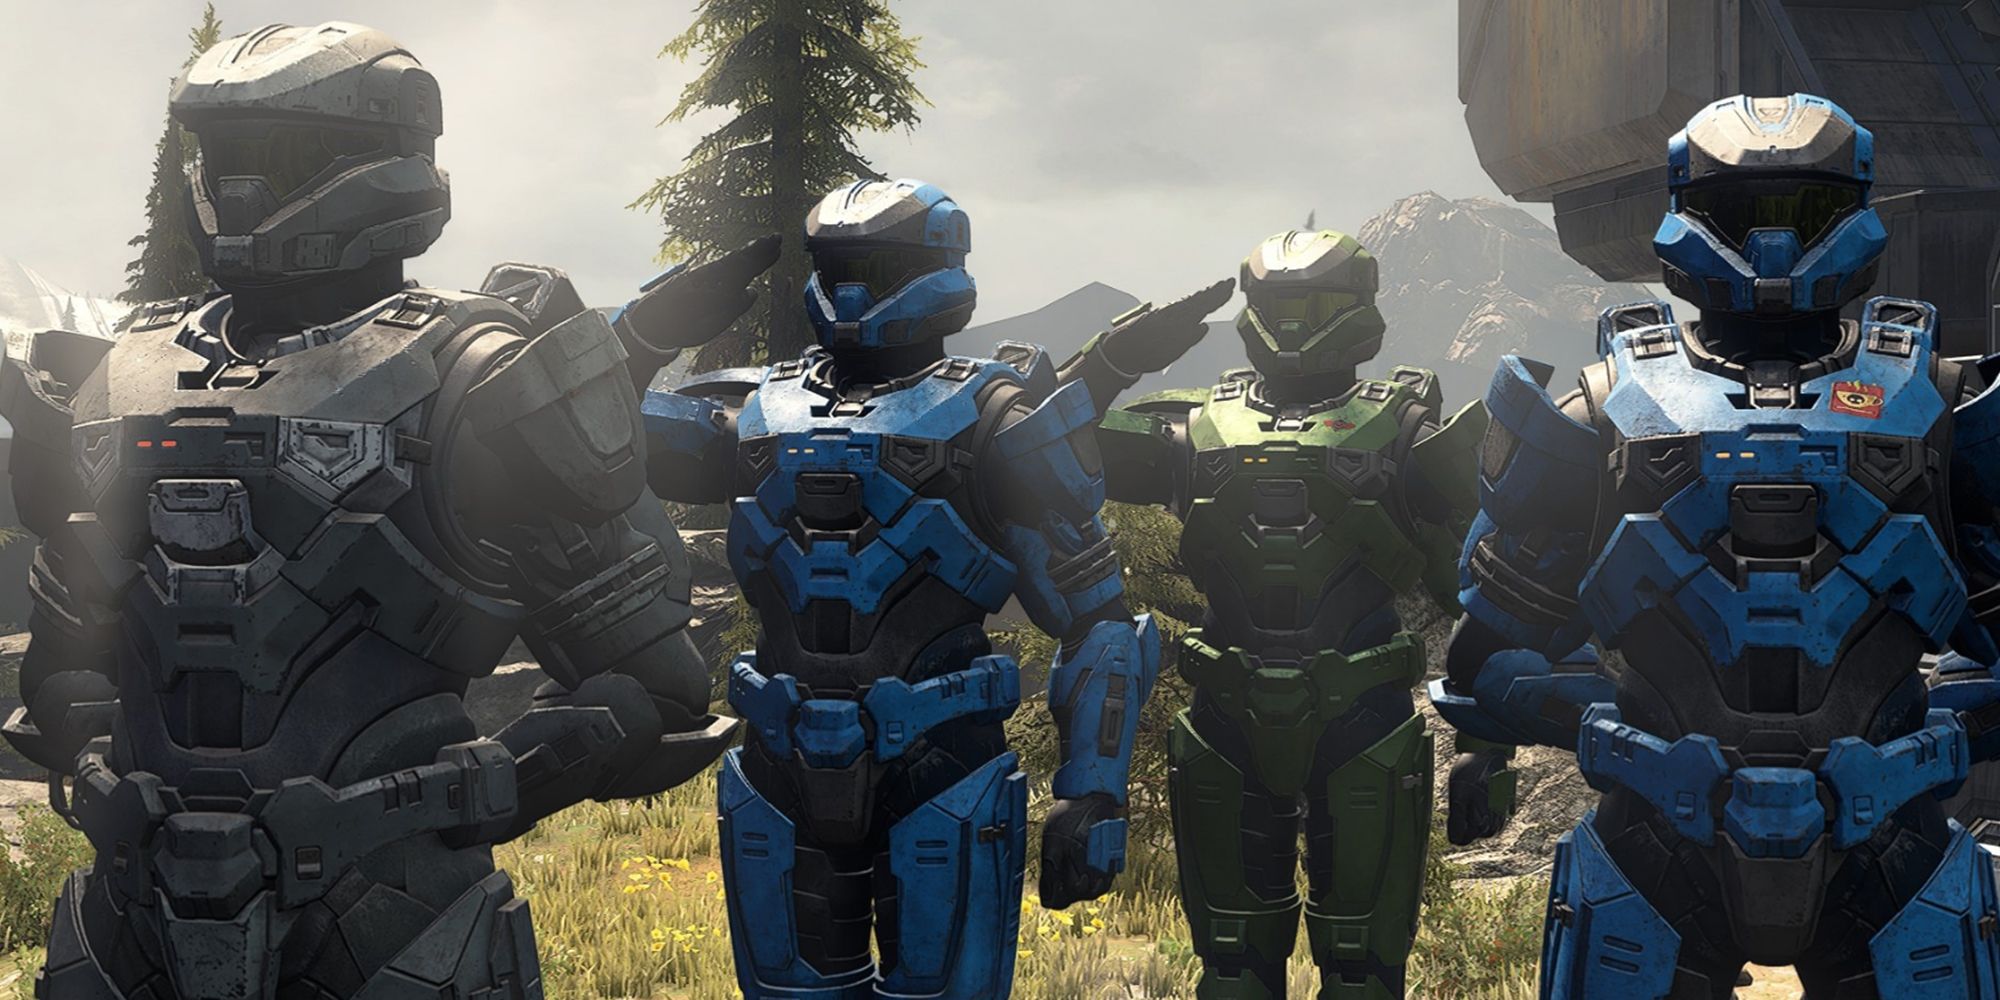 Halo Infinite - The Fireteam Squad Posing Together After A Game